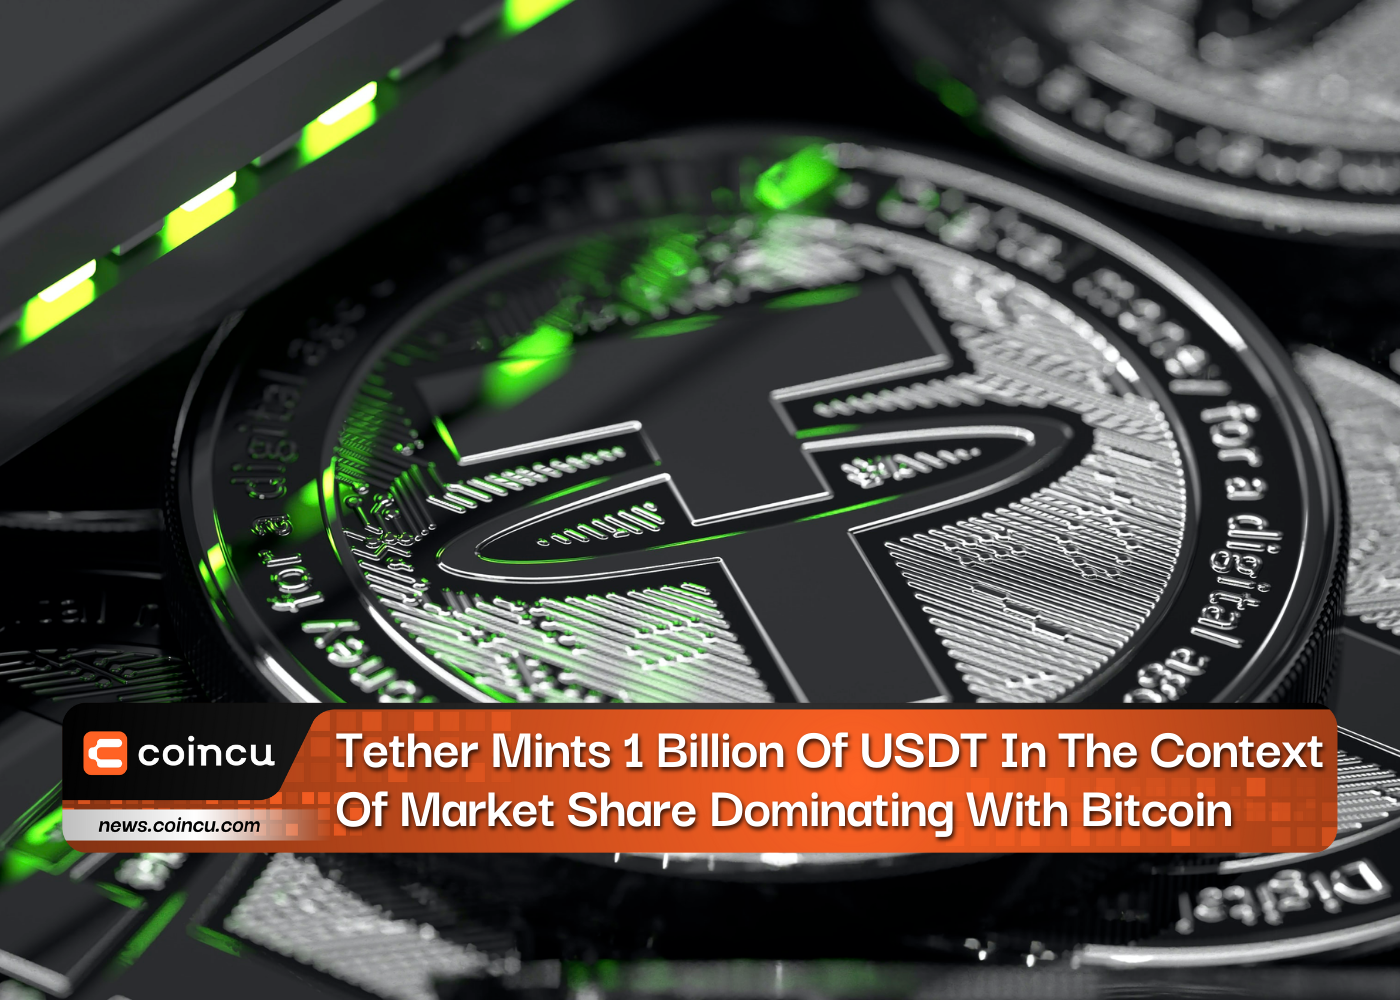 Tether Mints 1 Billion Of USDT In The Context Of Market Share Dominating With Bitcoin